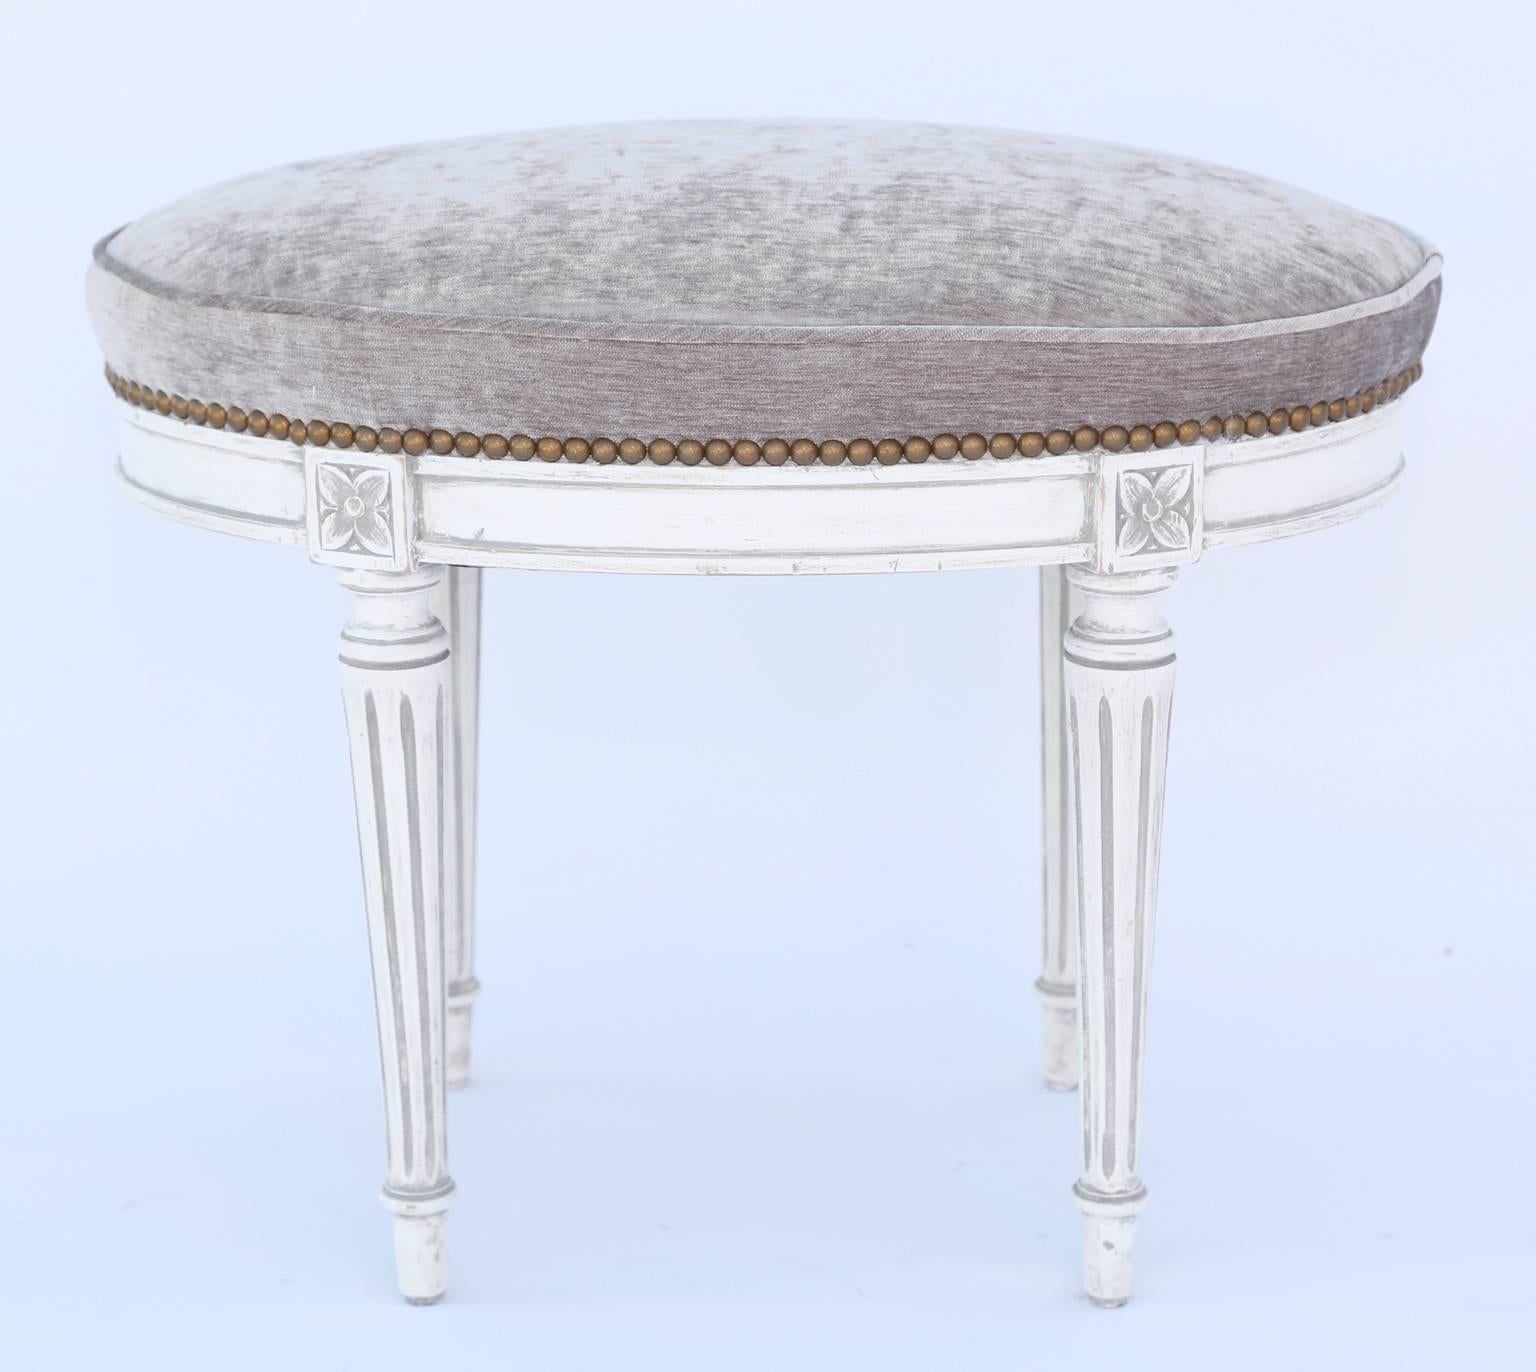 Oval stool, having a boxed seat in mushroom chenille with nailheads, on white painted frame showing natural wear, on fielded apron, raised on round, tapering, fluted legs, ending in touipe feet.

Stock ID: D1338.